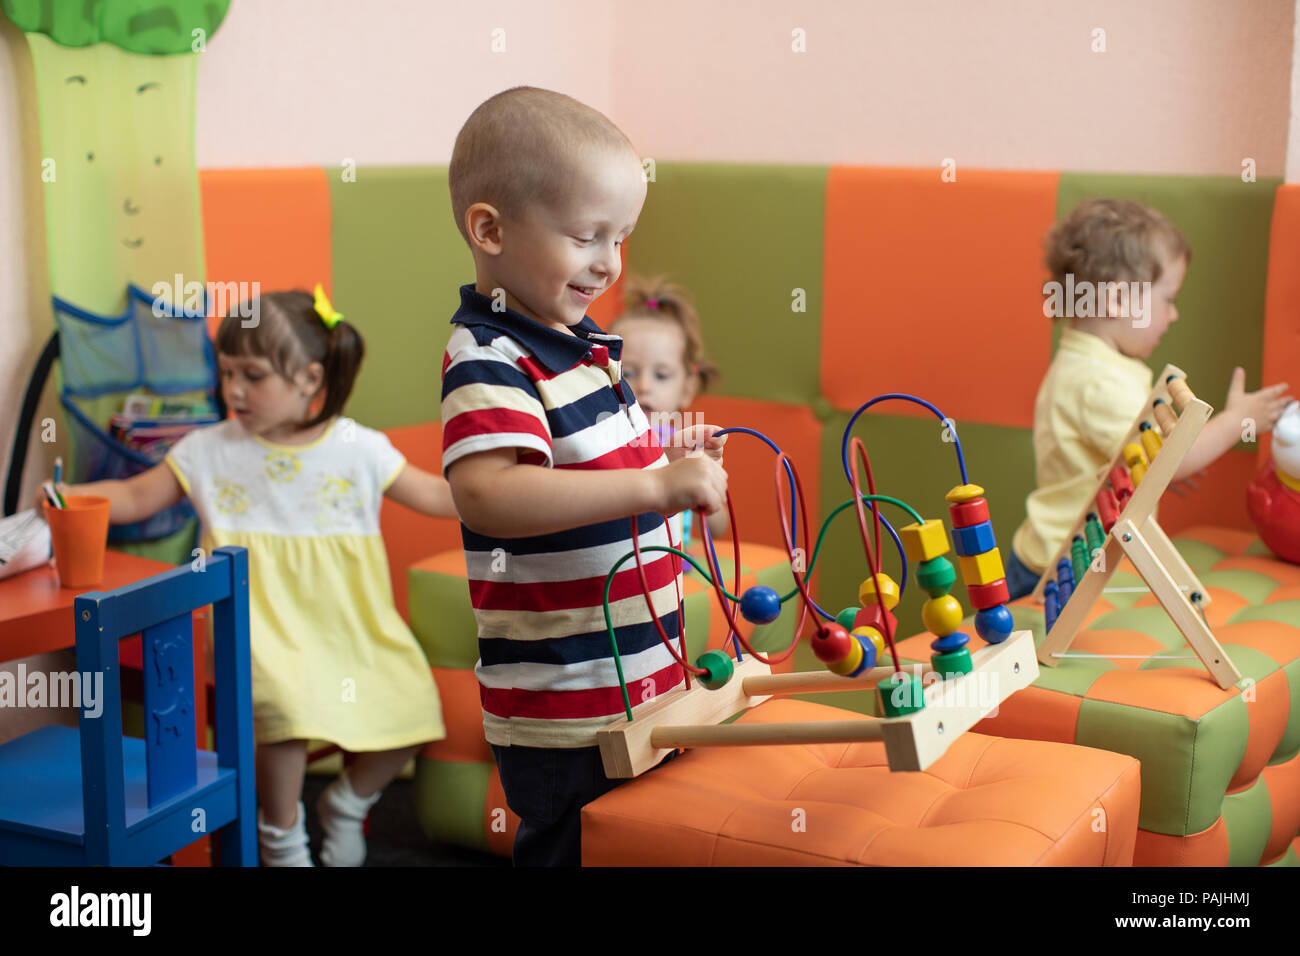 Group of children playing in kindergarten or daycare centre Stock Photo